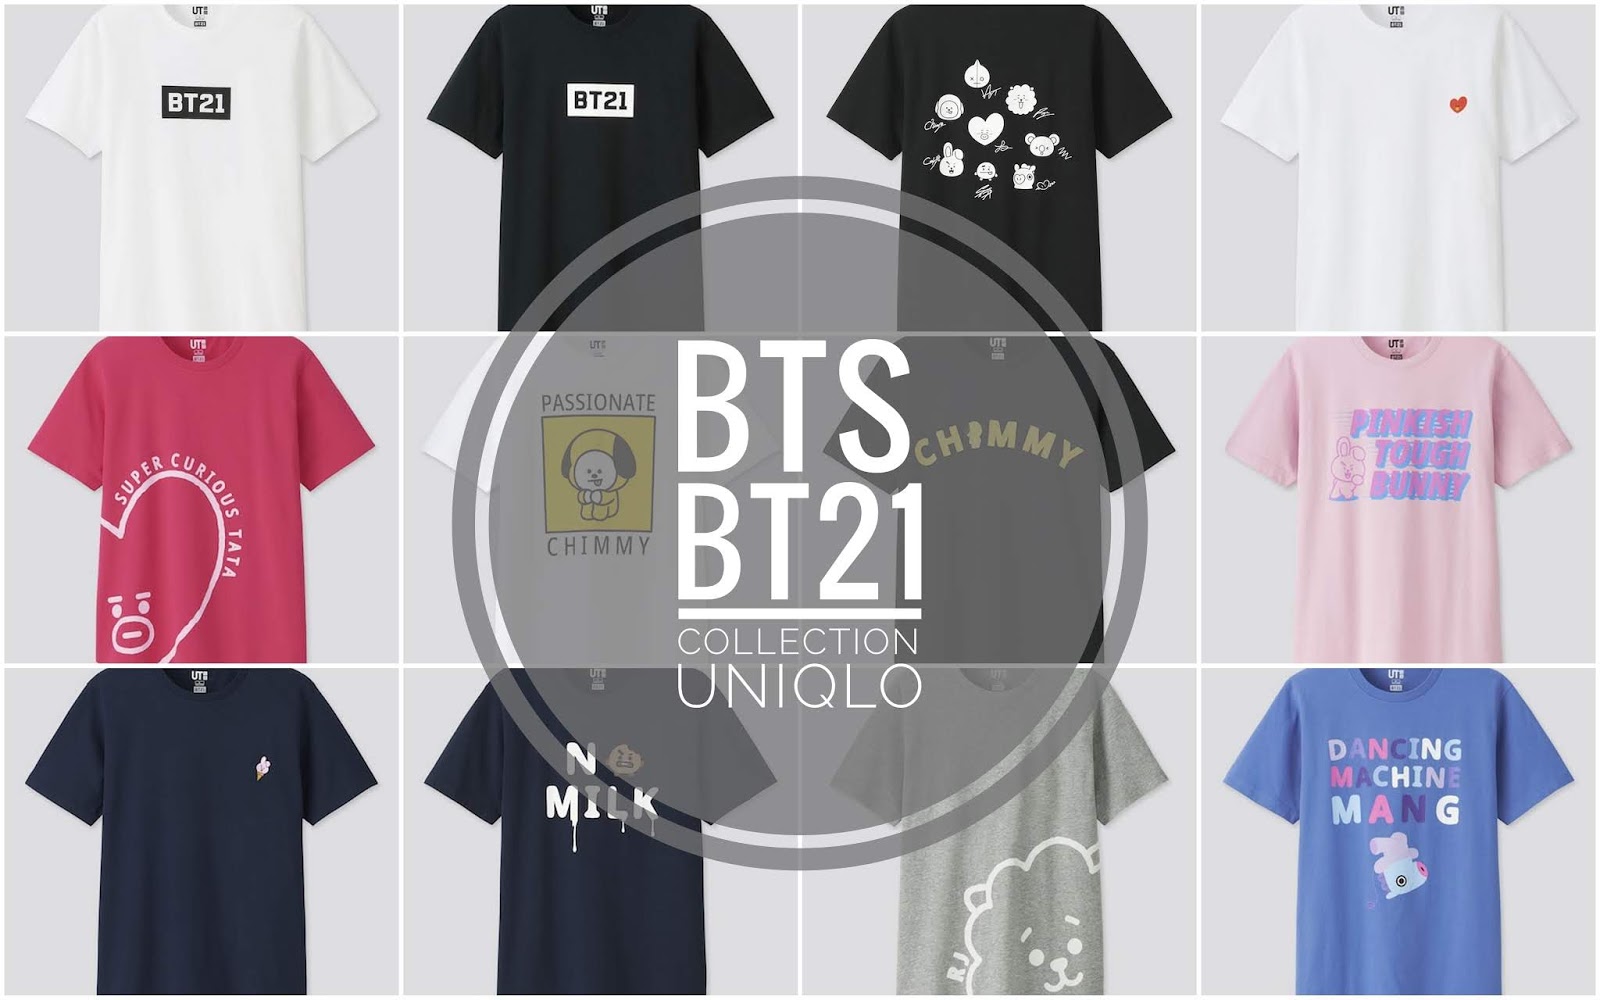 Uniqlo X Bts Bt21 Shirt Limited To One Per Customer The Wacky Duo Singapore Family Lifestyle Travel Website